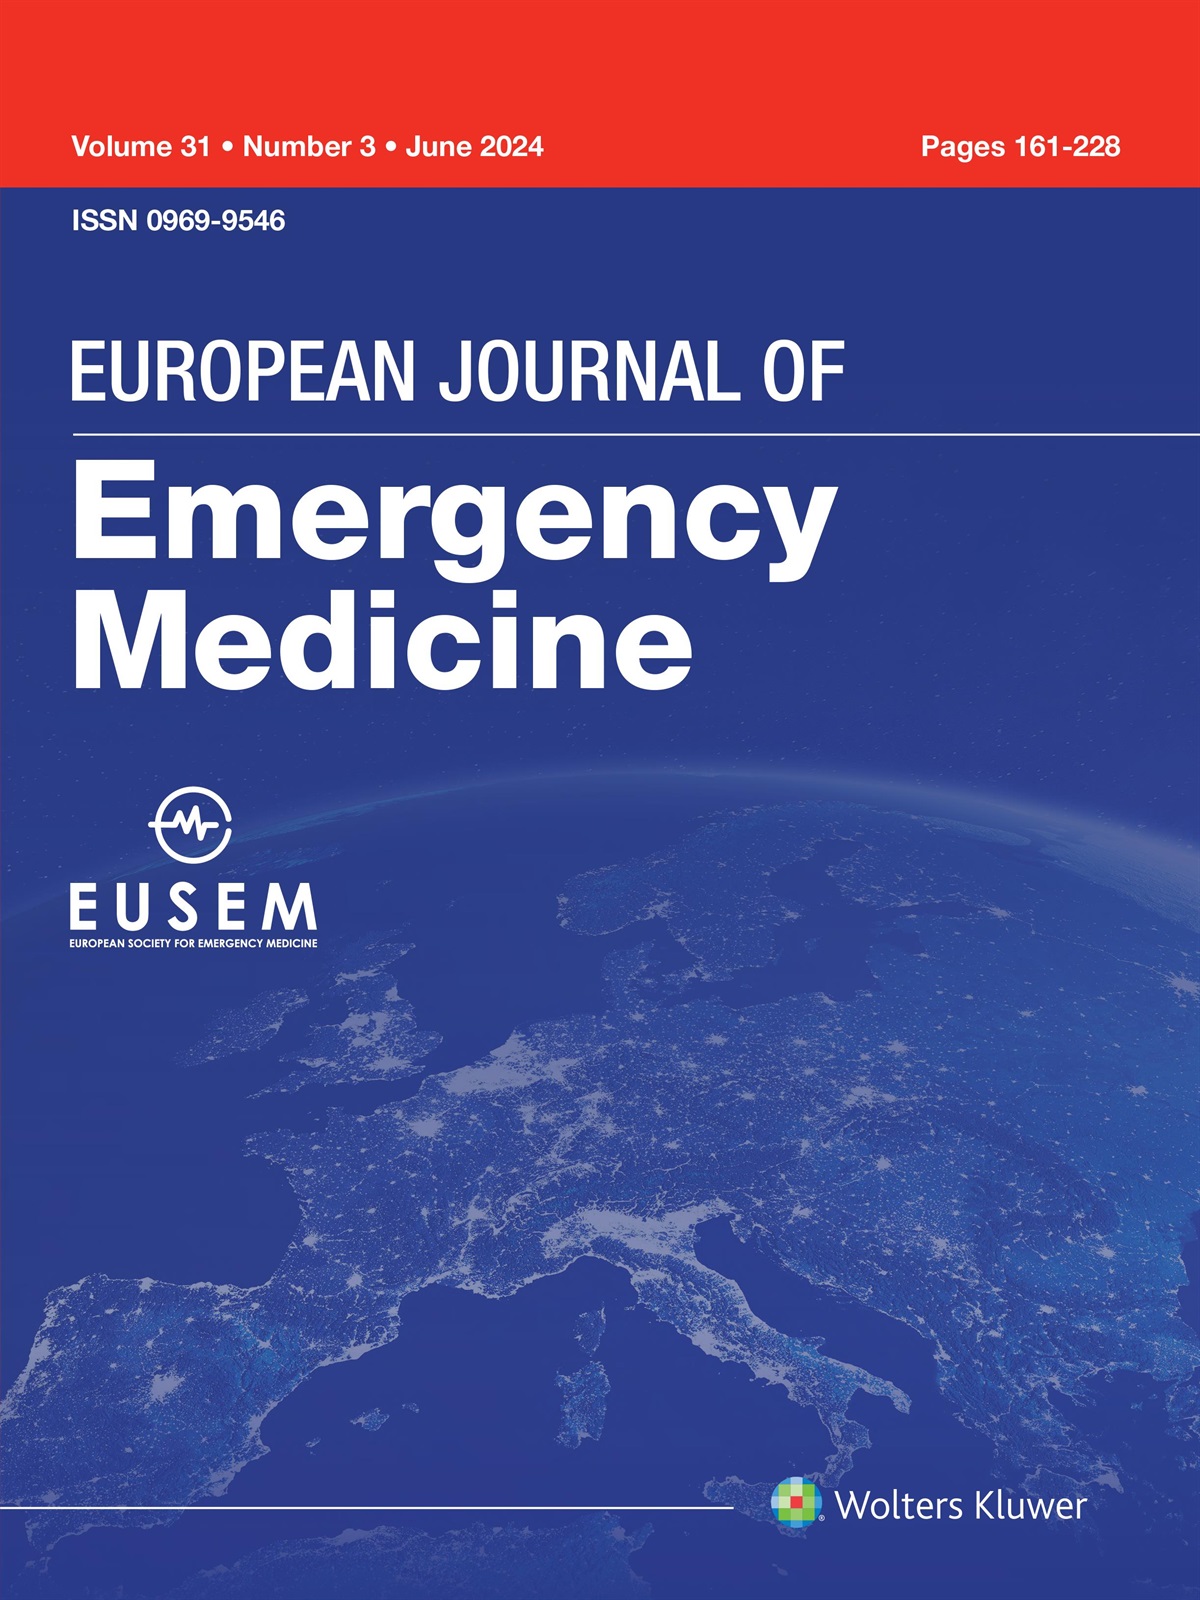 Authors’ response to comments on ‘Subcutaneous versus intravenous tramadol for extremity injury with moderate pain in the emergency department: a randomised controlled noninferiority trial’